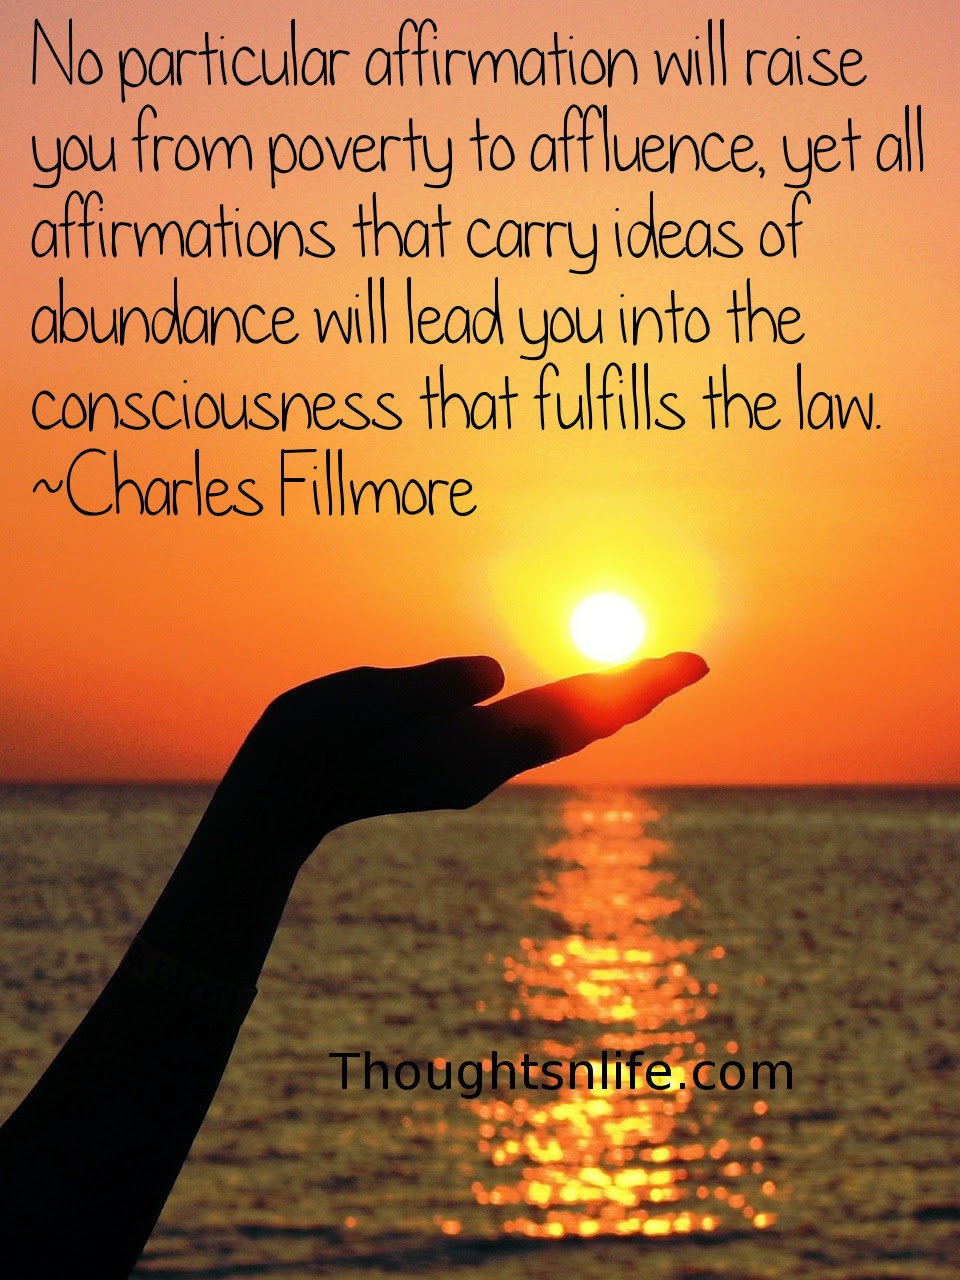 Thoughtsnlife.com: No particular affirmation will raise you from poverty to affluence, yet all affirmations that carry ideas of abundance will lead you into the consciousness that fulfills the law.  Charles Fillmore